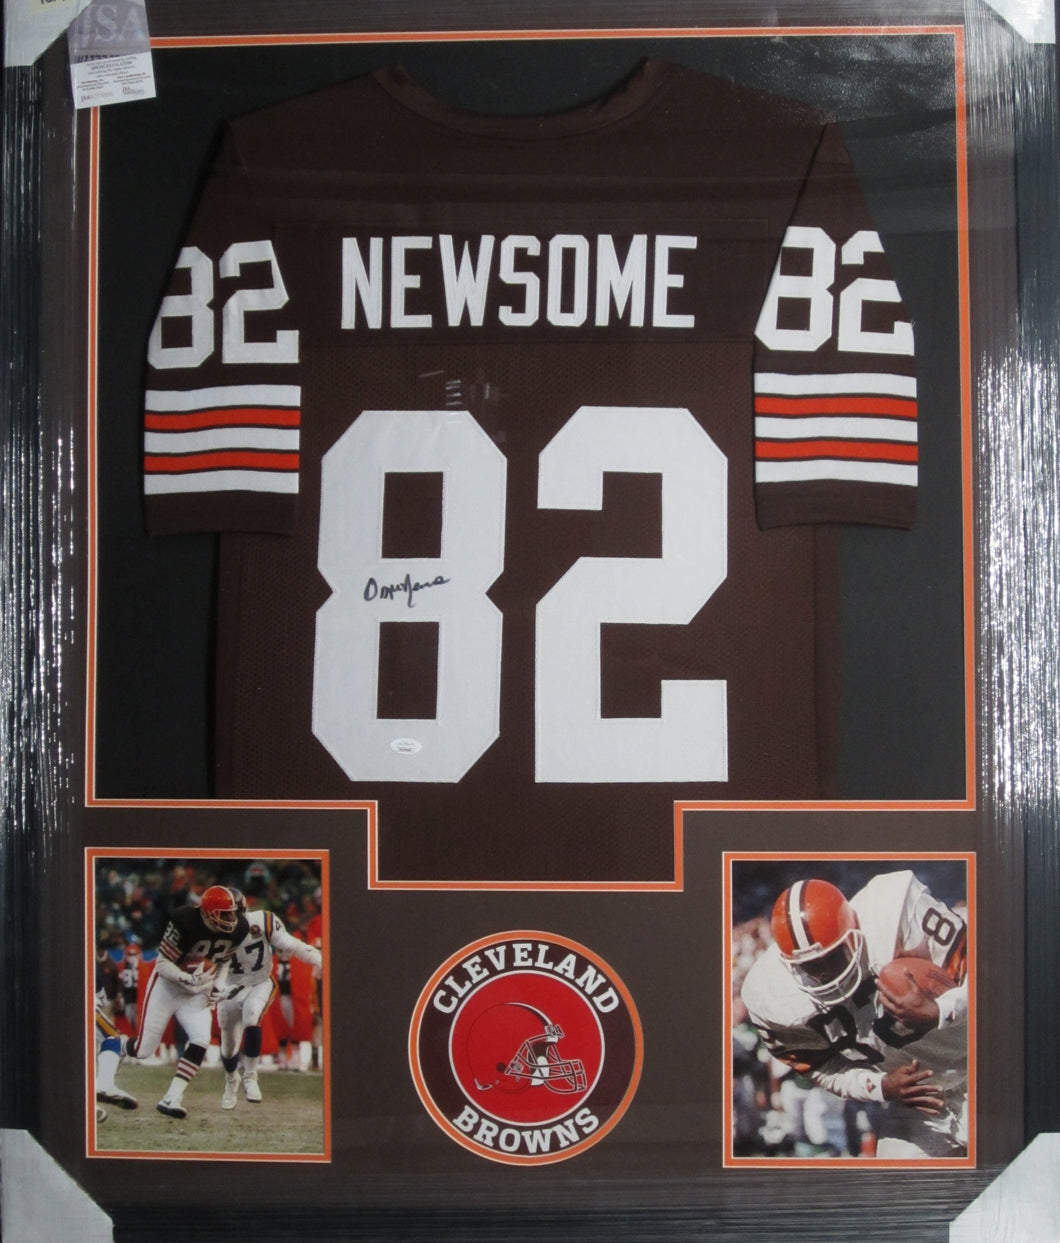 Cleveland Browns Ozzie Newsome Signed Jersey Framed & Matted with JSA COA